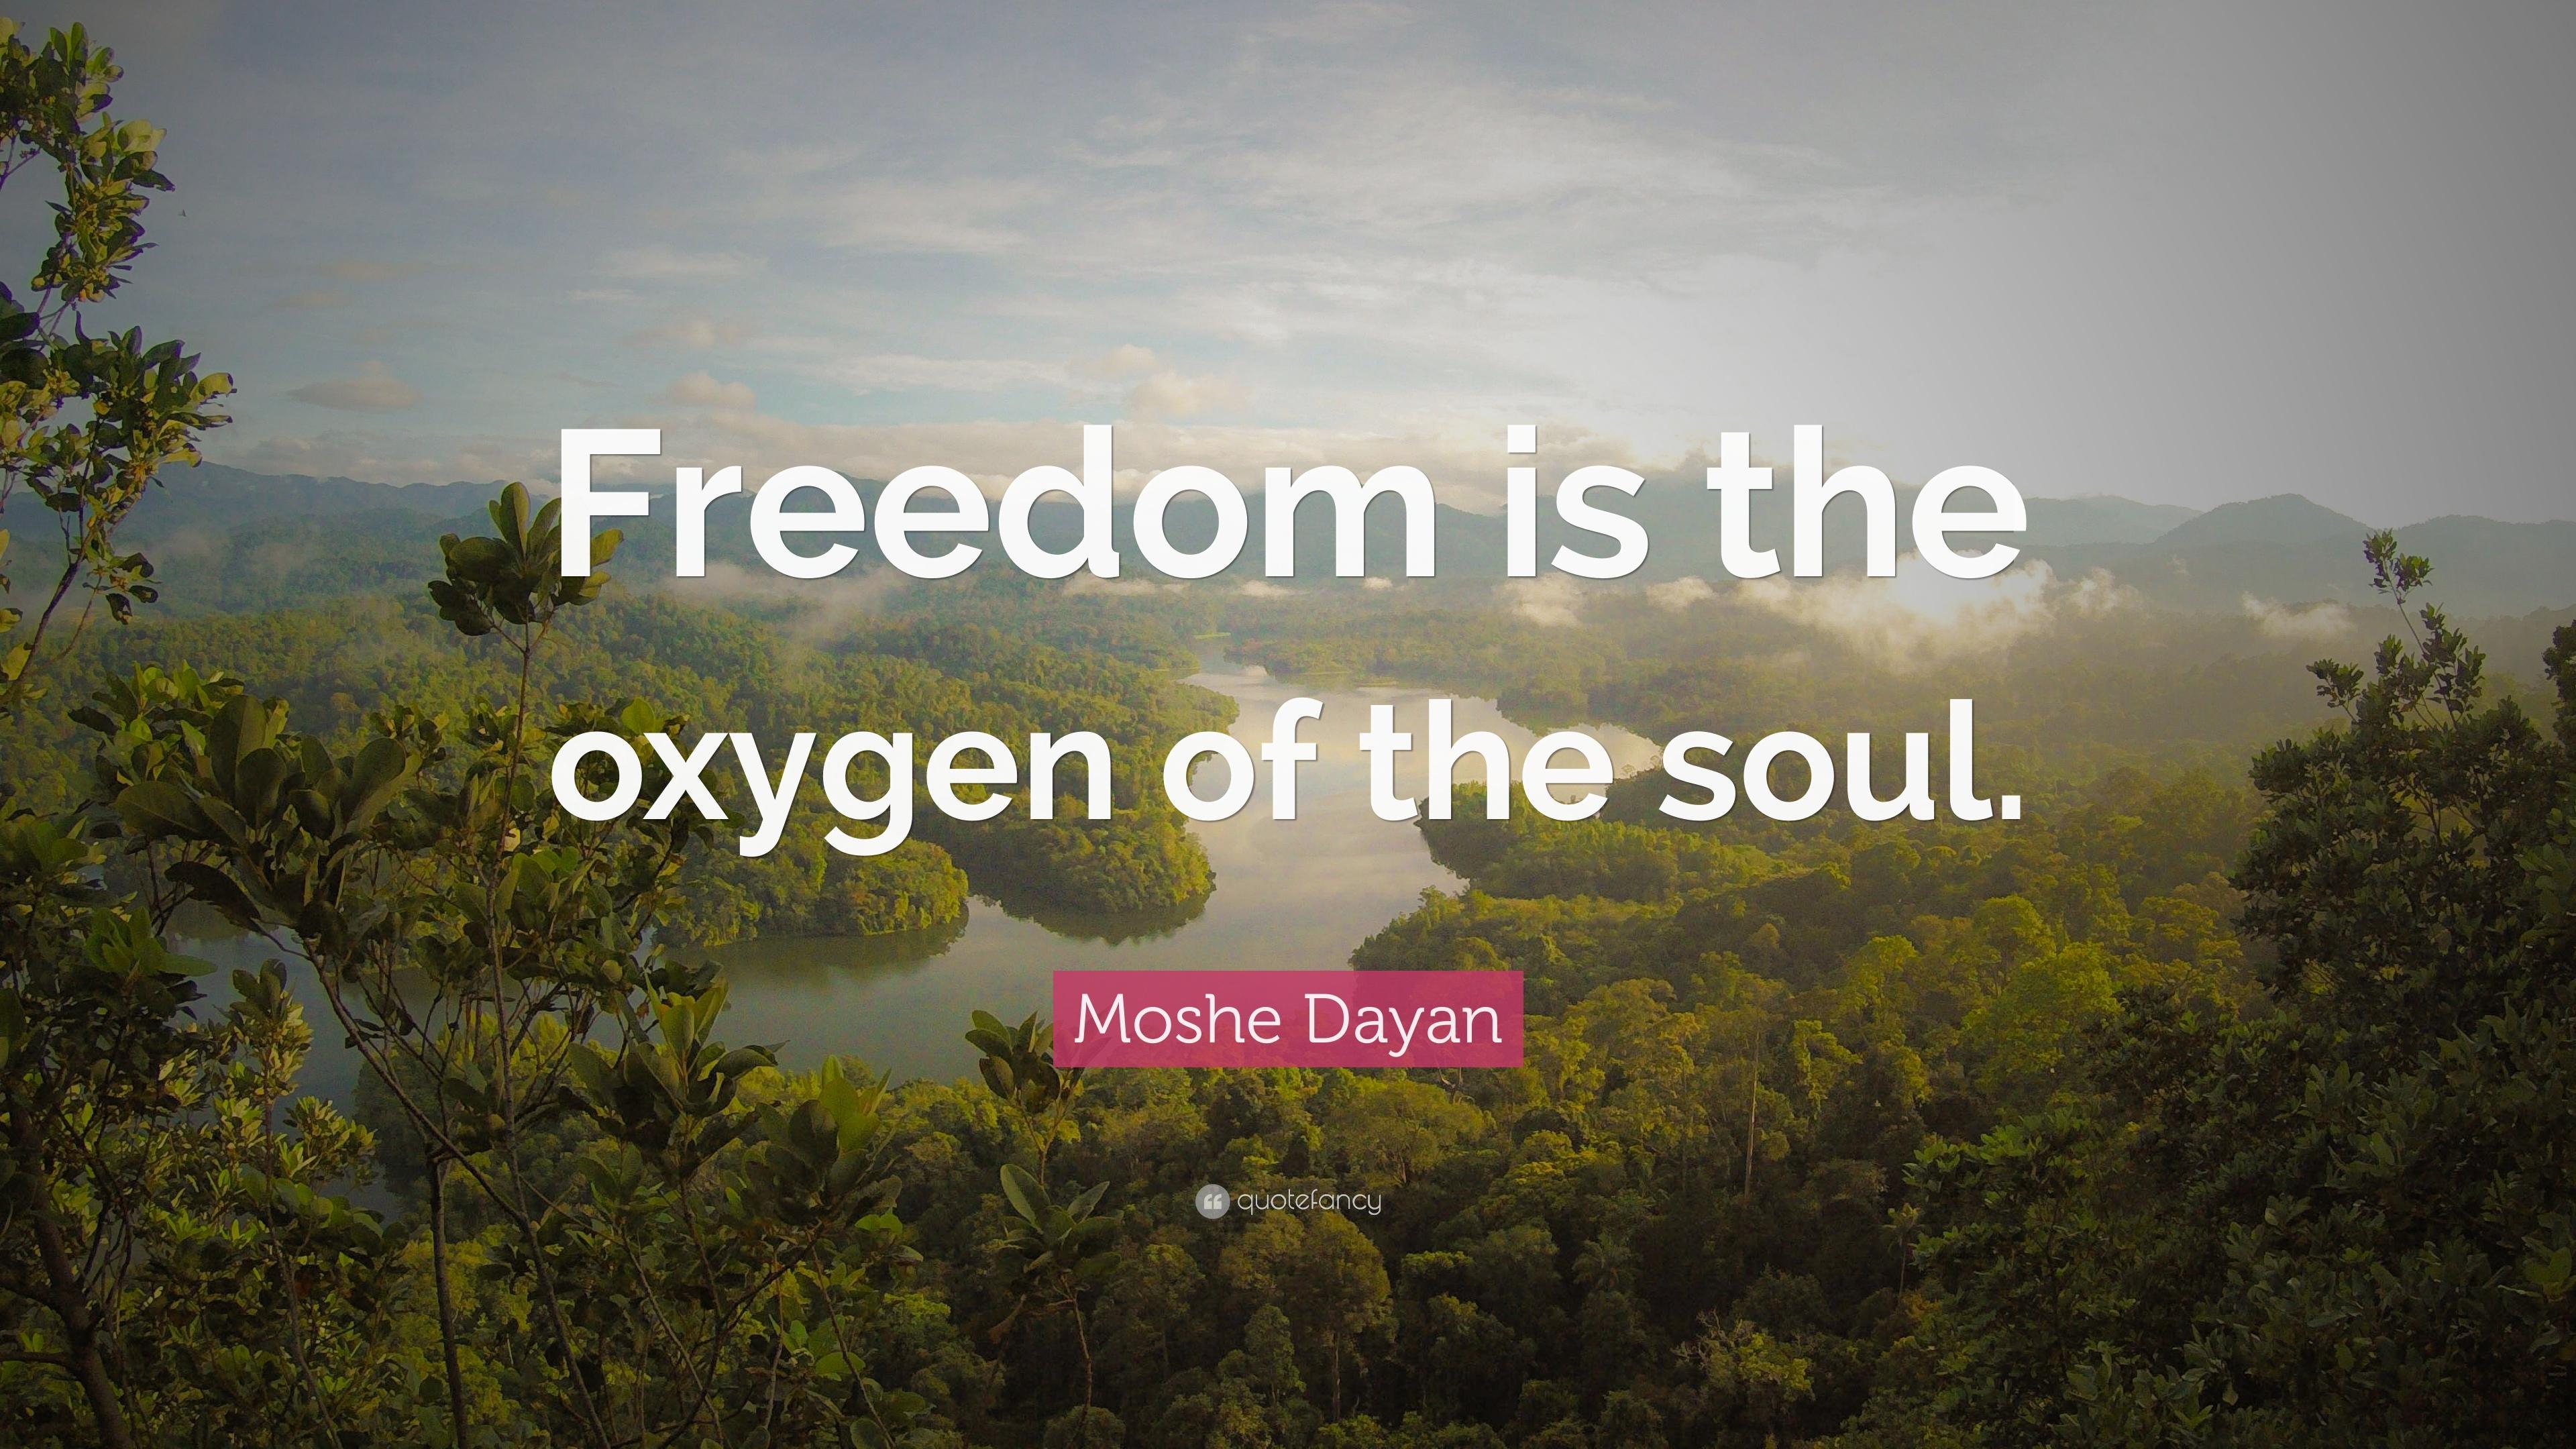 Moshe Dayan Quote: “Freedom is the oxygen of the soul.” 24